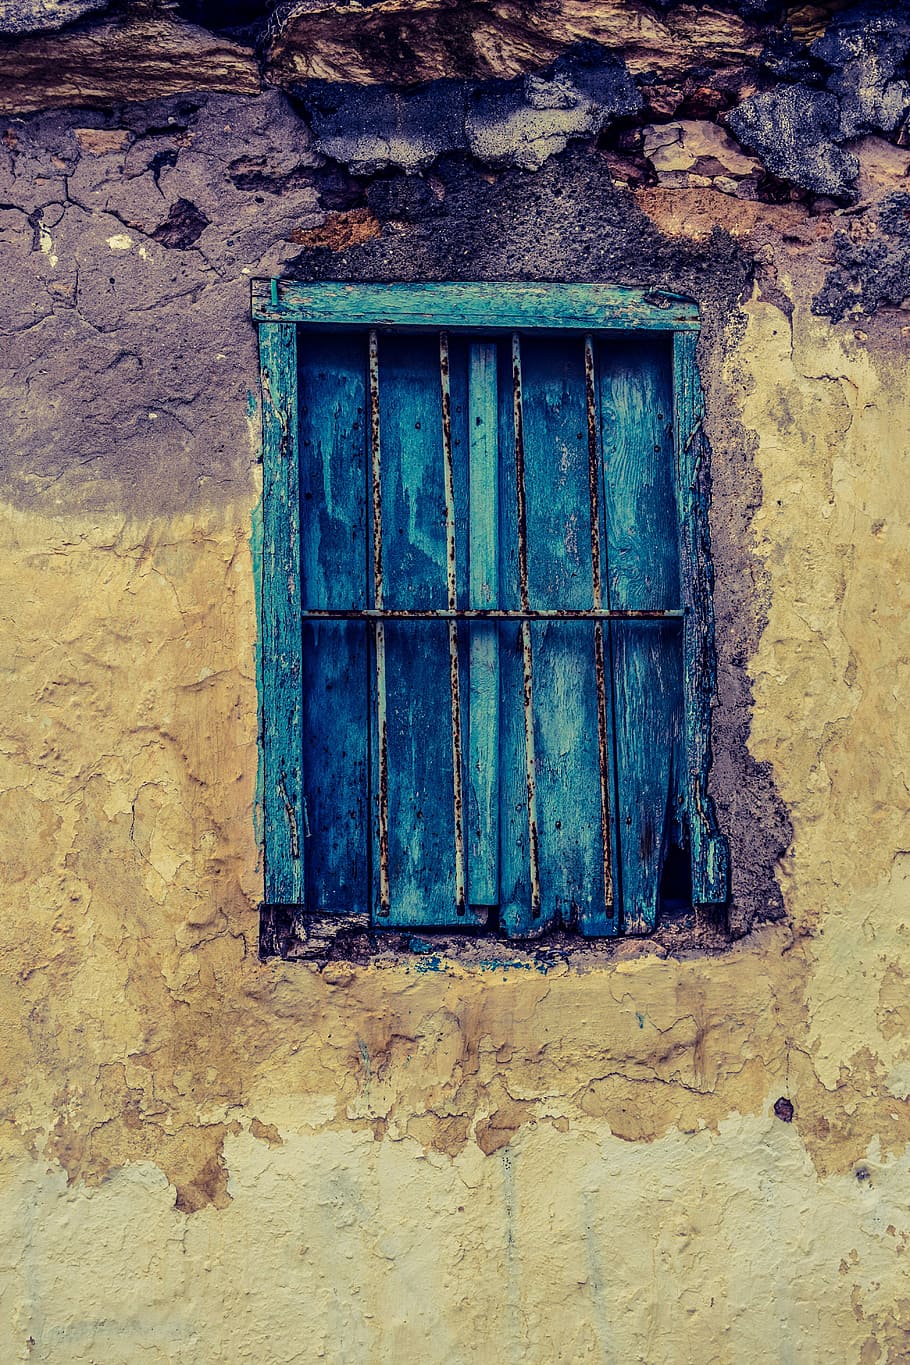 Cyprus, Paralimni, Old House, Abandoned, window, aged, wooden, rusty, green, traditional